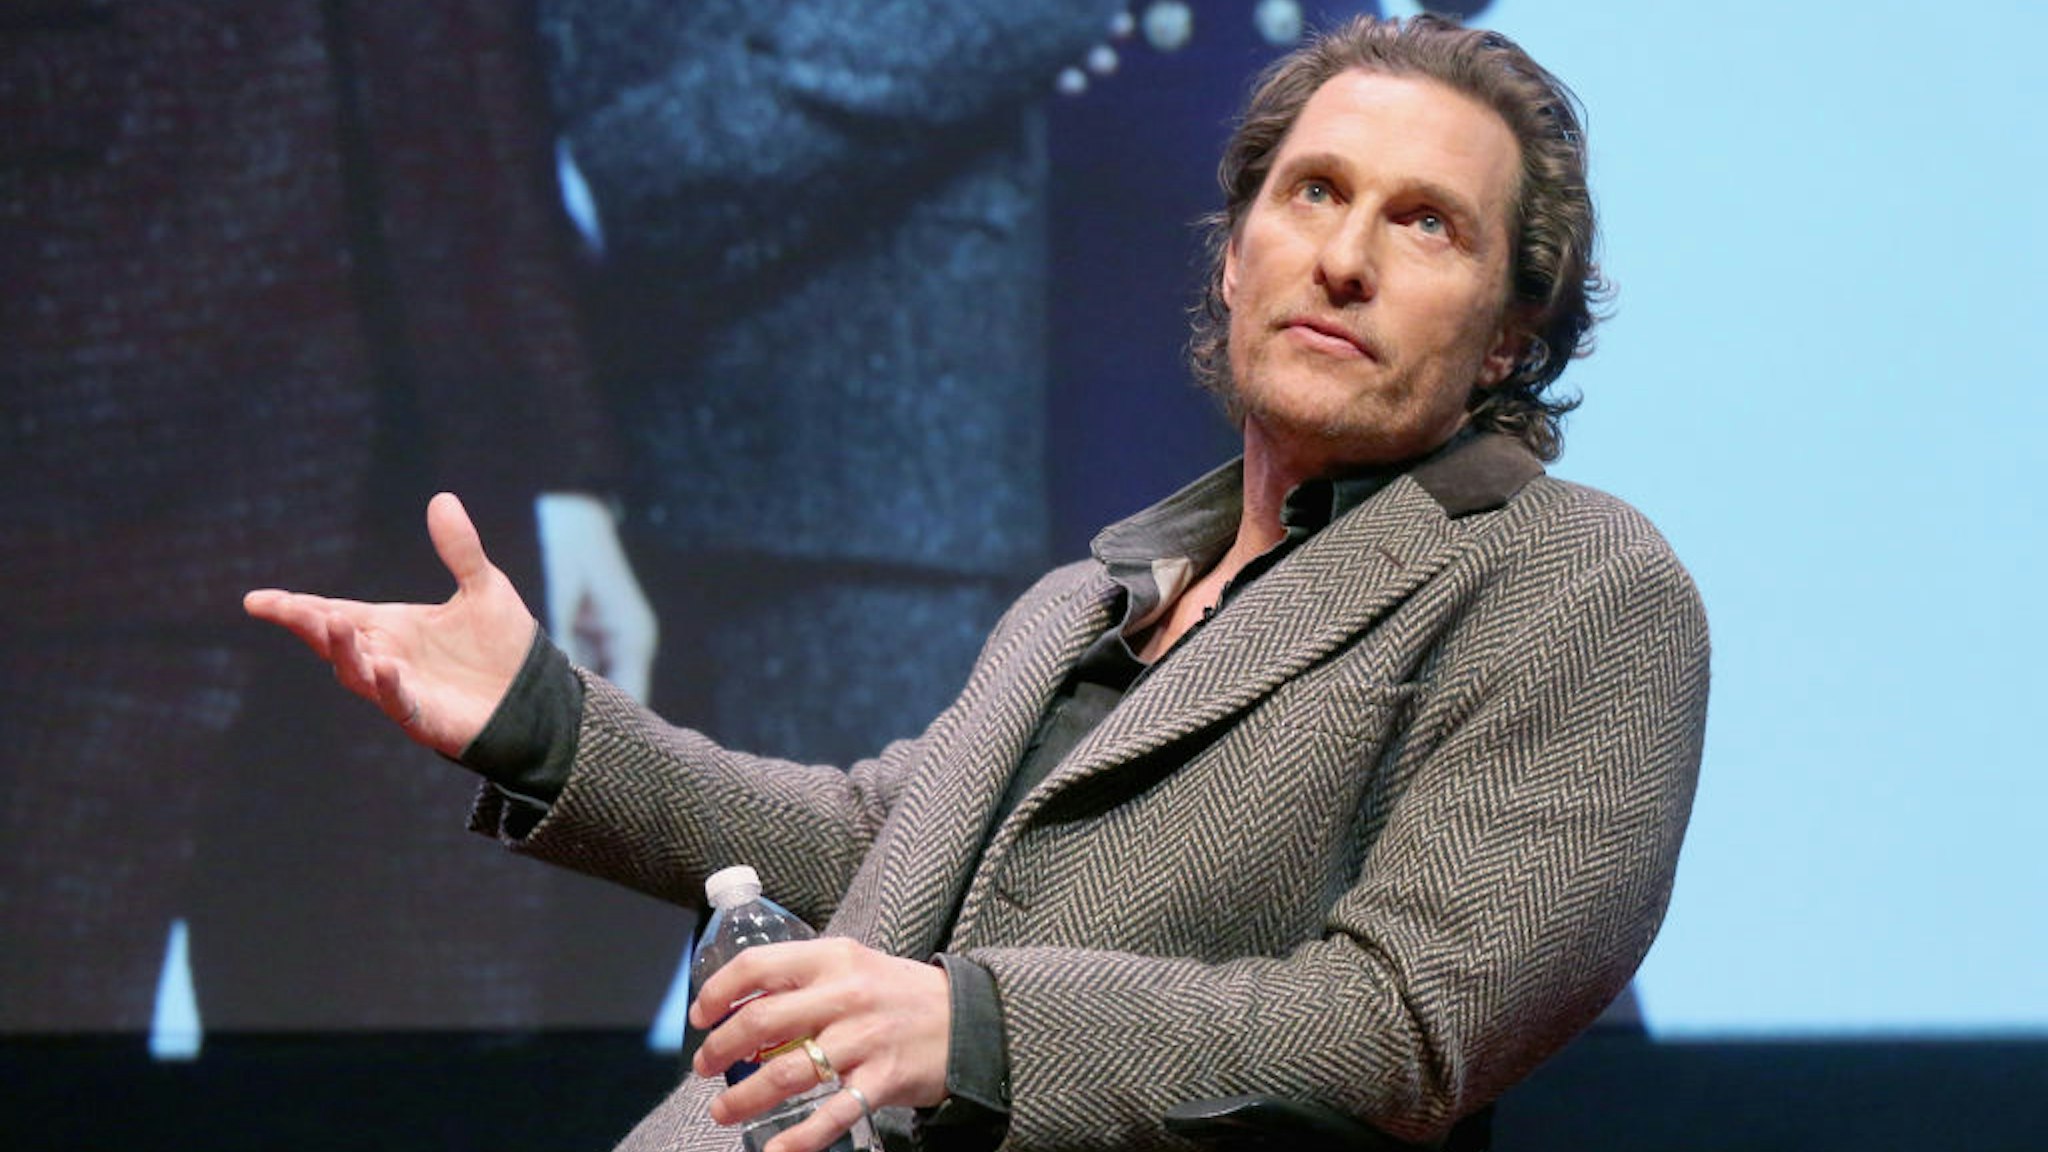 Matthew McConaughey participates in a Q&A after a special screening of his new film "The Gentlemen" at Hogg Memorial Auditorium at The University of Texas at Austin on January 21, 2020 in Austin, Texas.